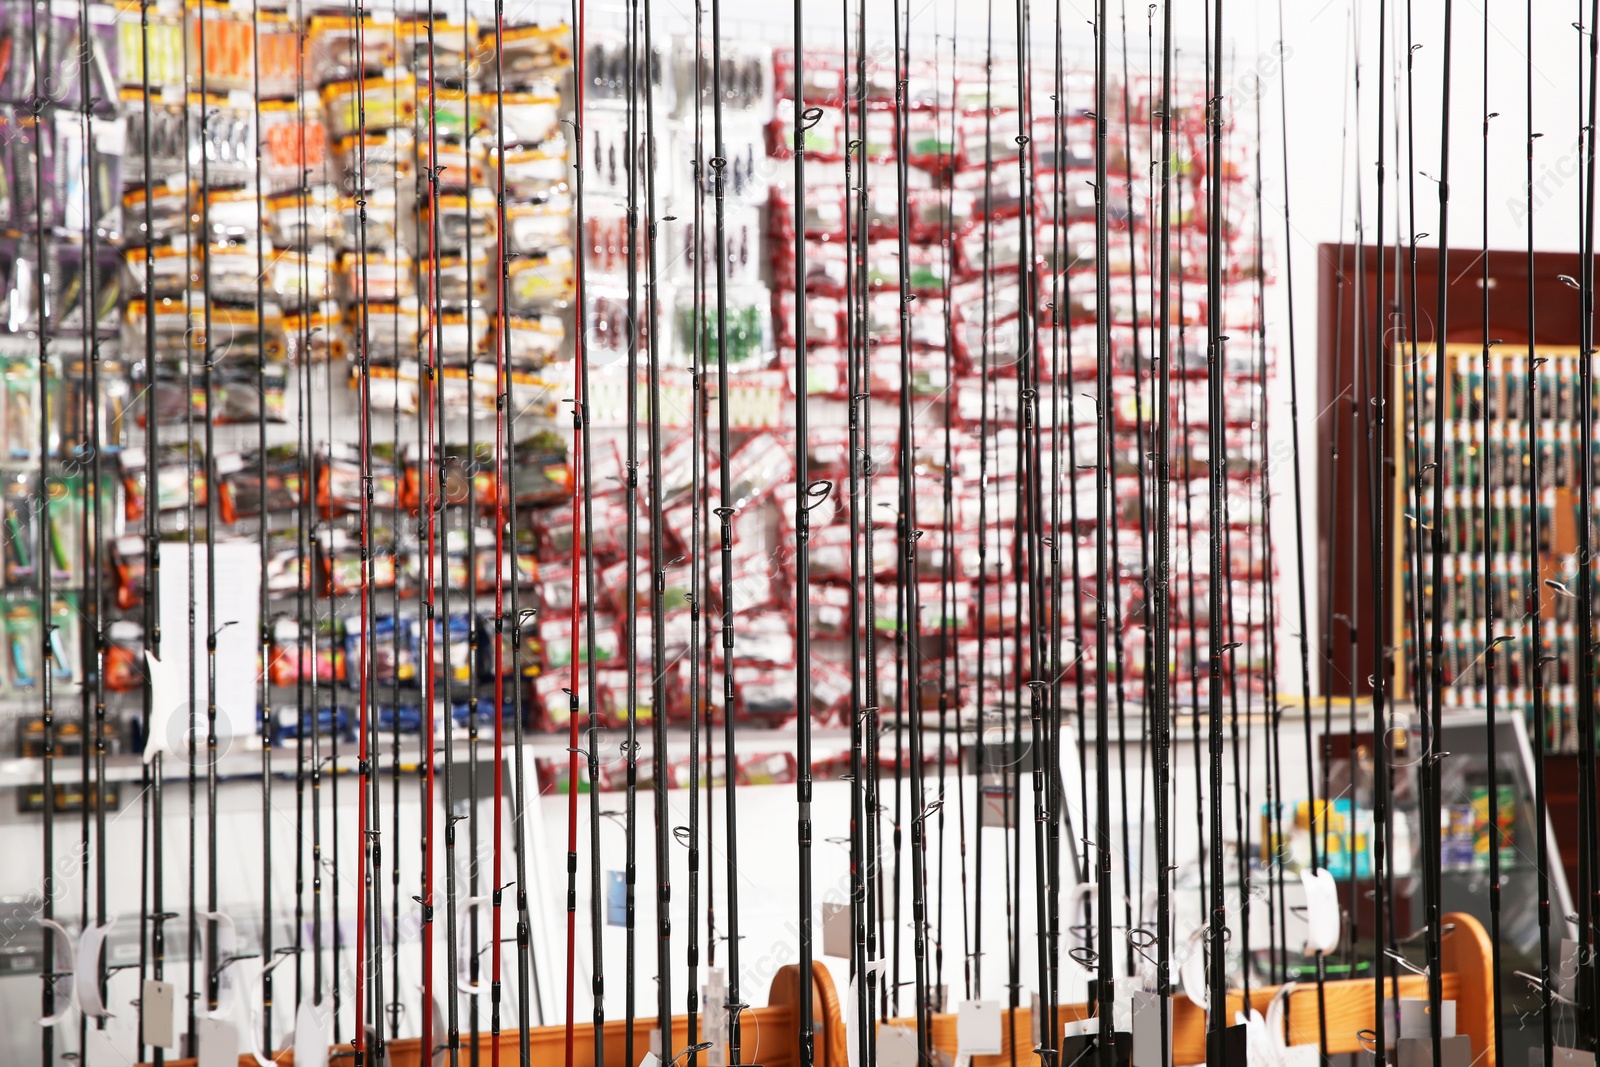 Photo of Stand with different fishing rods in sports shop